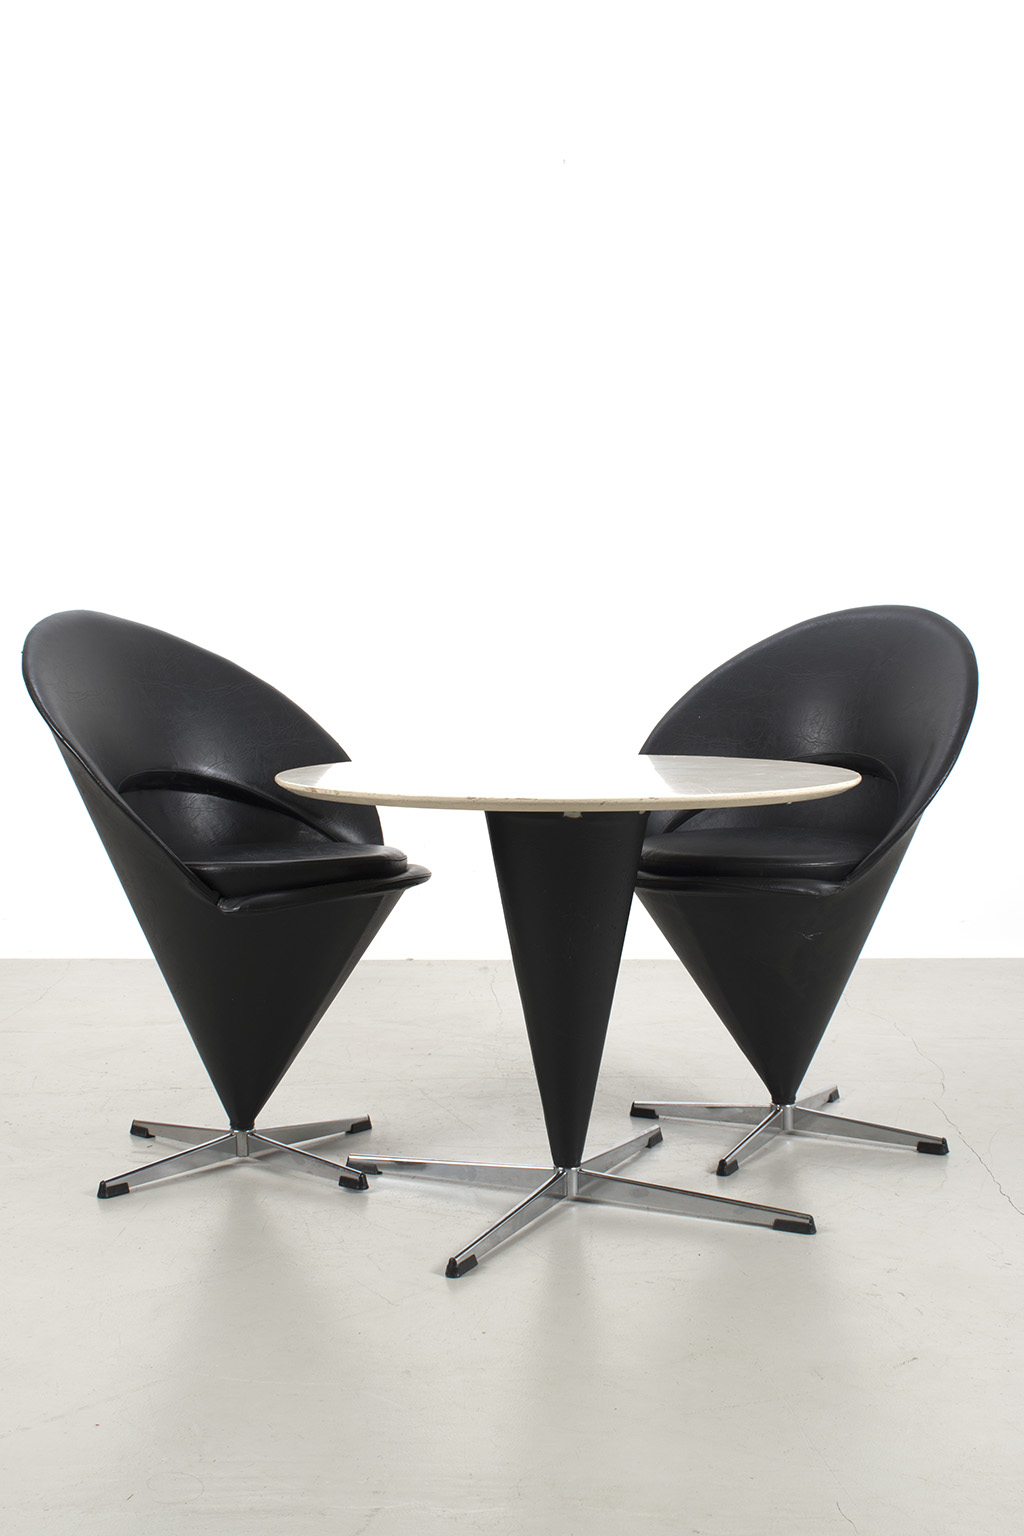 Verner Panton Cone chairs and table